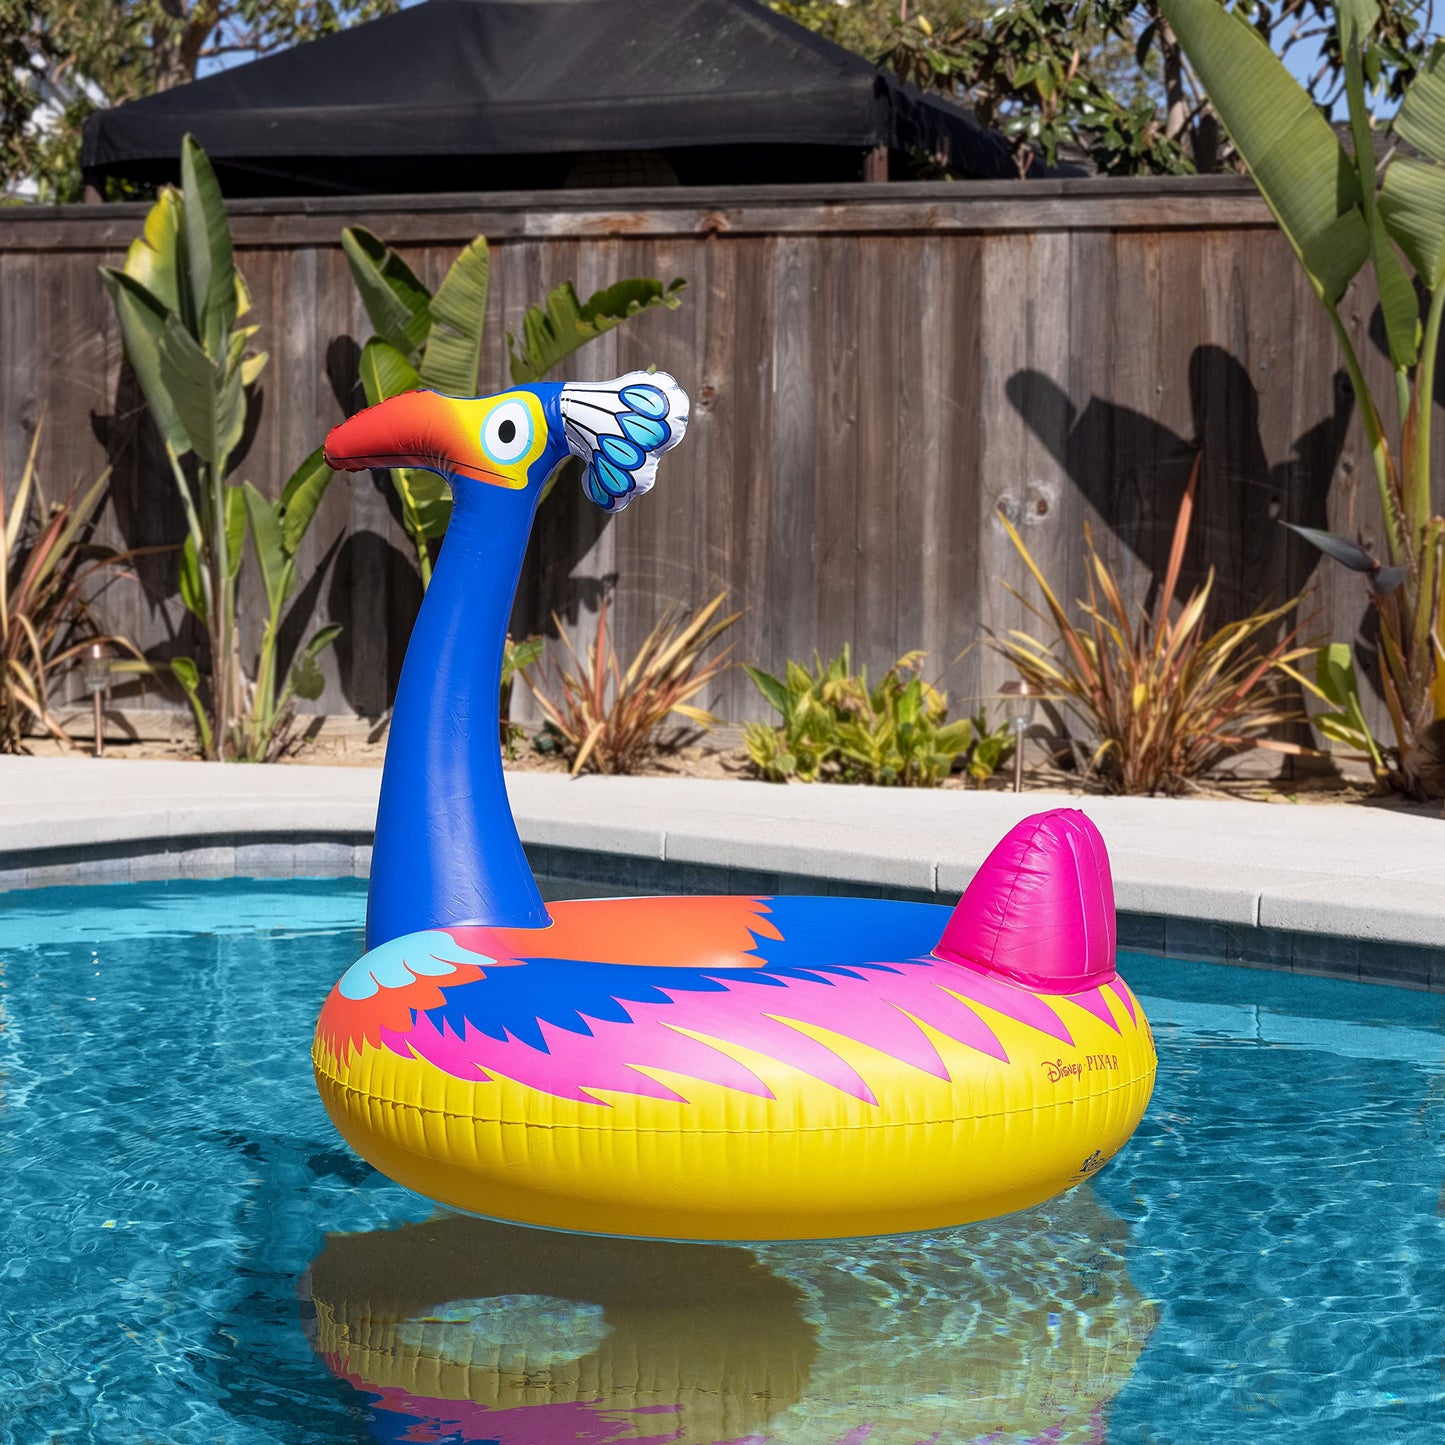 Disney Pool Float Party Tube by GoFloats - Choose Between Mickey and Friends, Monster's Inc, Finding Nemo, Lilo and Stitch, UP and Wall-E Kevin